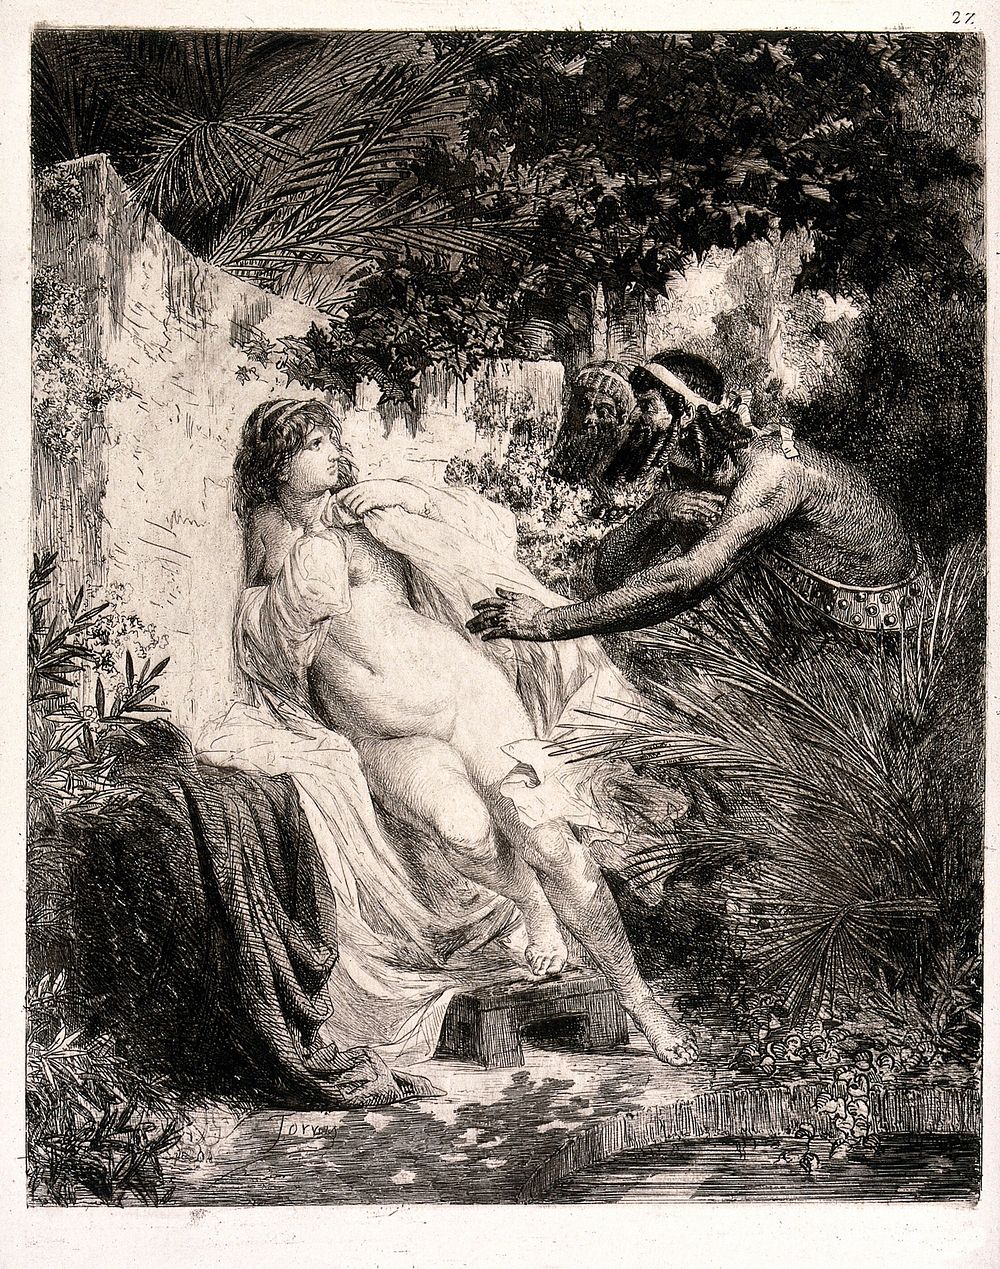 Susanna standing by a wall near a pool and being approached by two men. Etching by F. Torras Armengol.